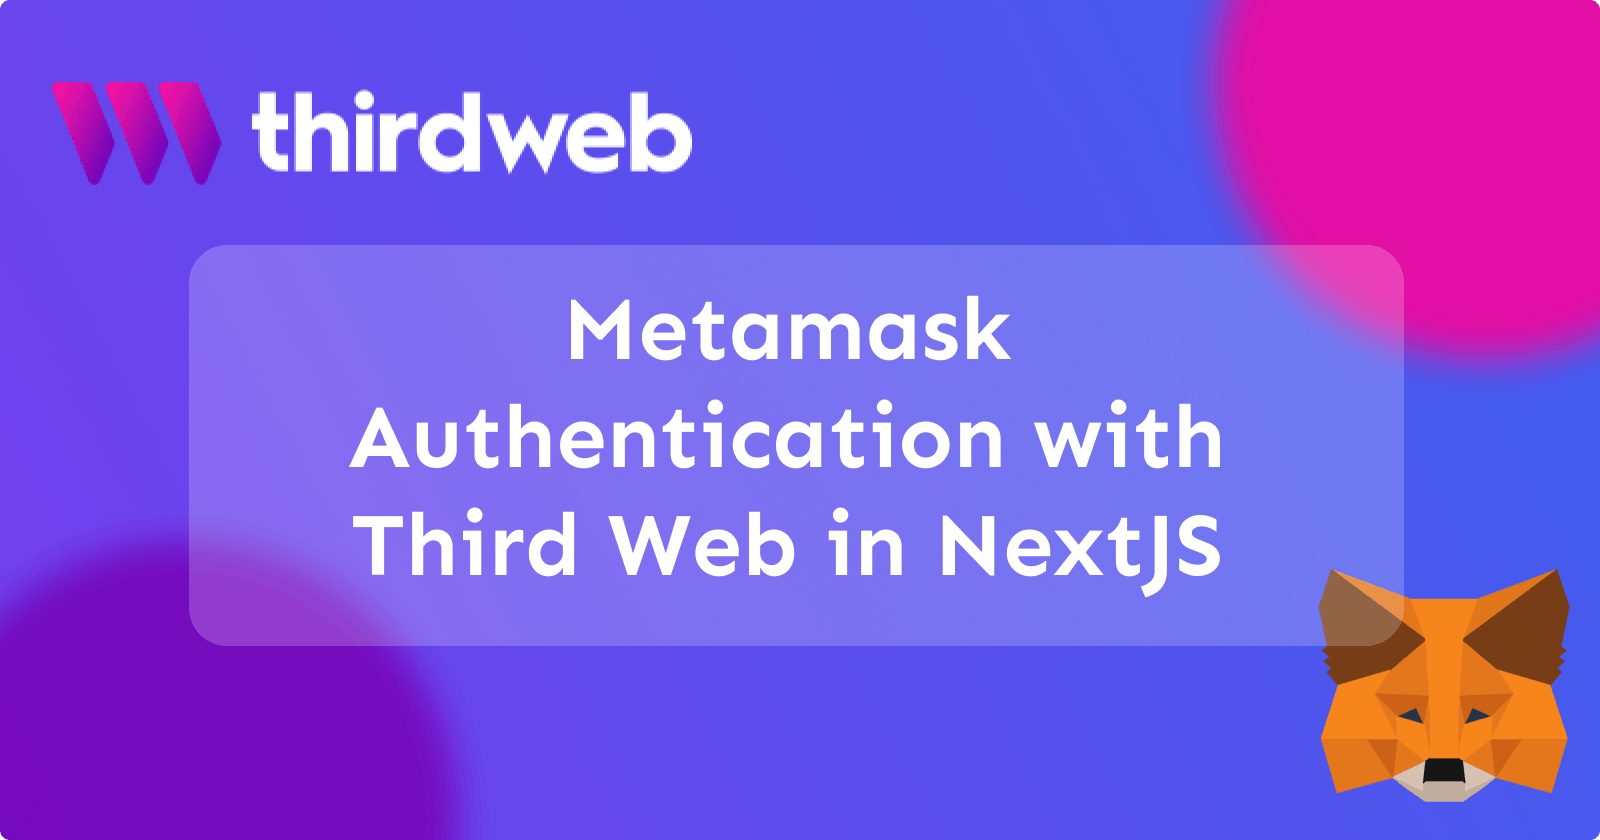 Metamask authentication in NextJS with Third Web